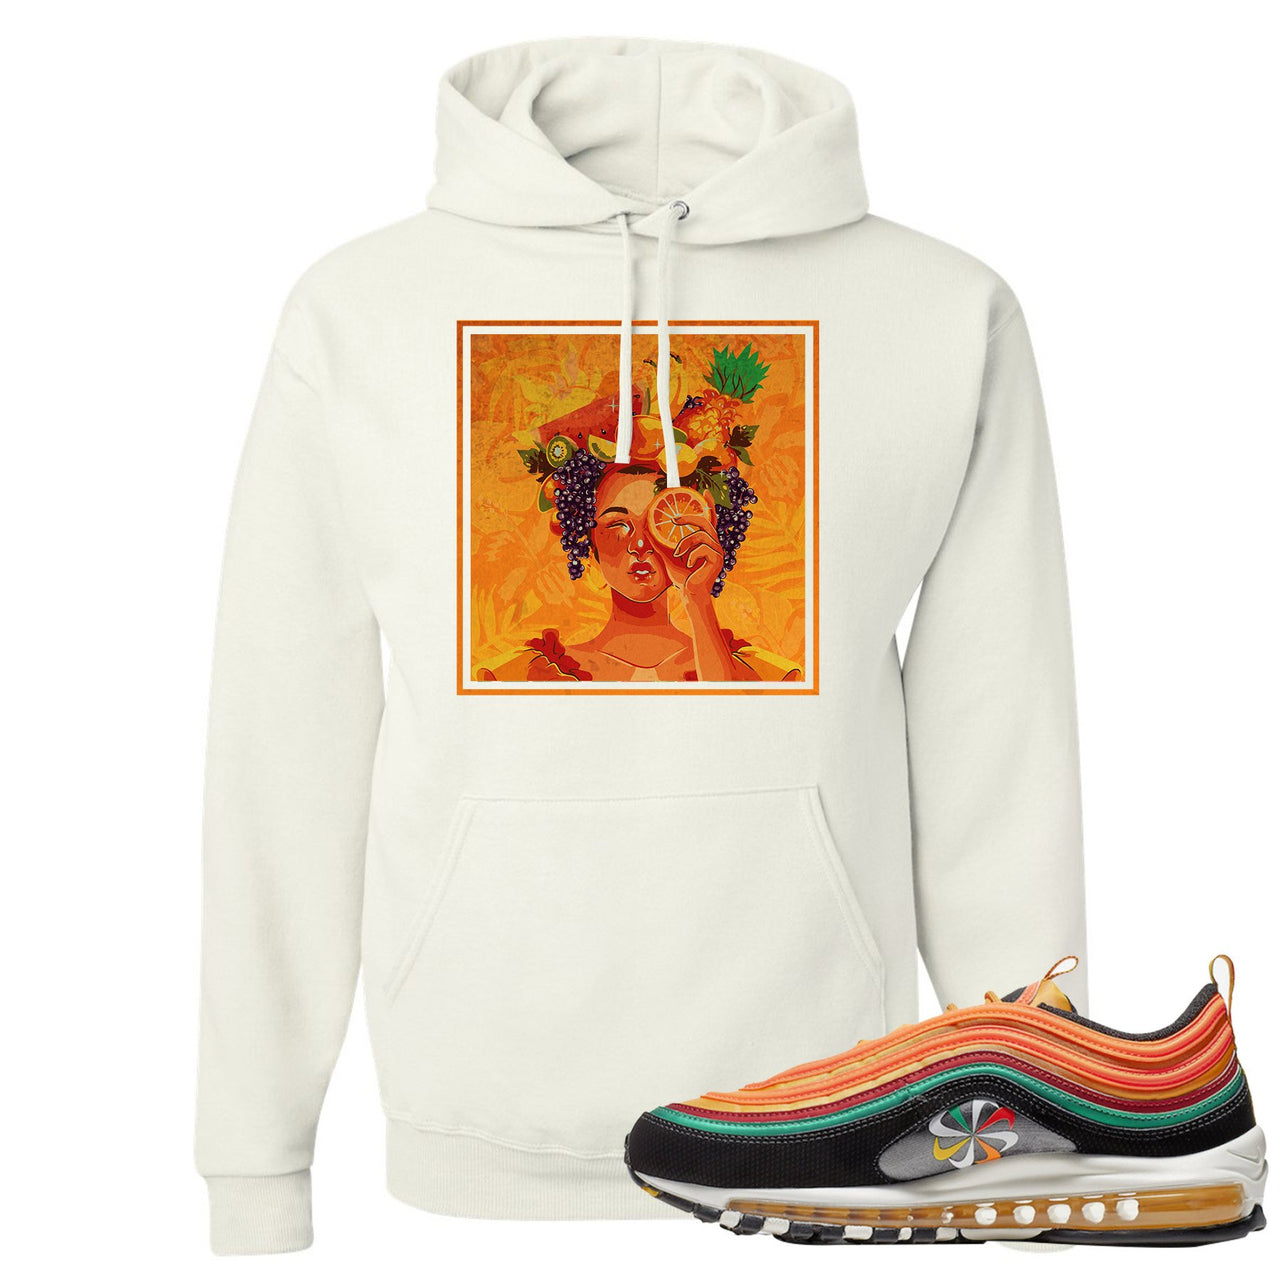 Printed on the front of the Air Max 97 Sunburst white sneaker matching pullover hoodie is the Lady Fruit logo